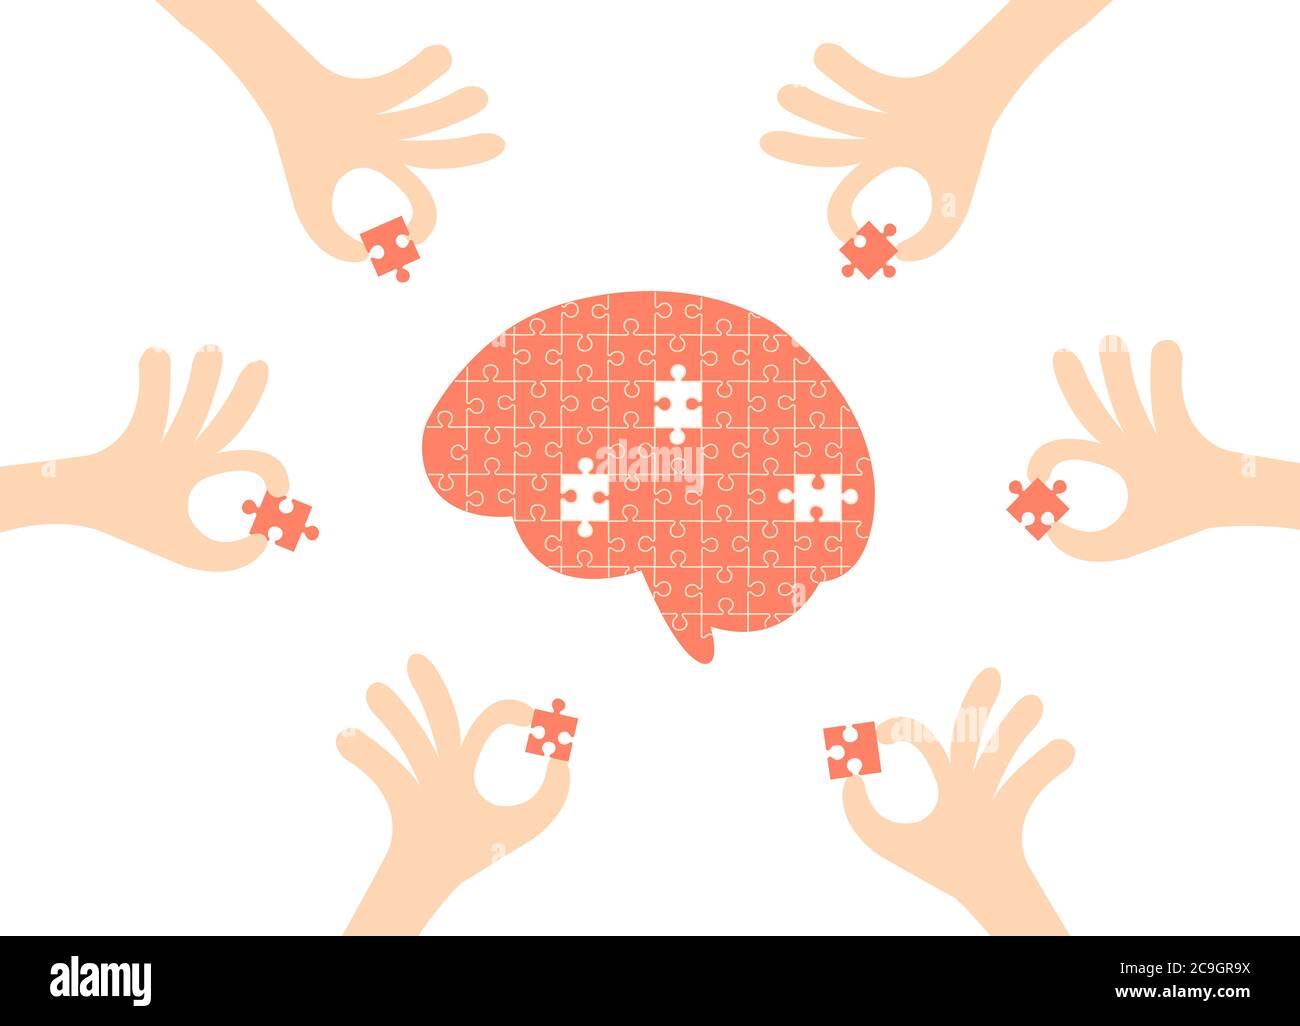 Brain jigsaw with hand holding pieces of the puzzle isolated on white background. Stock Vector